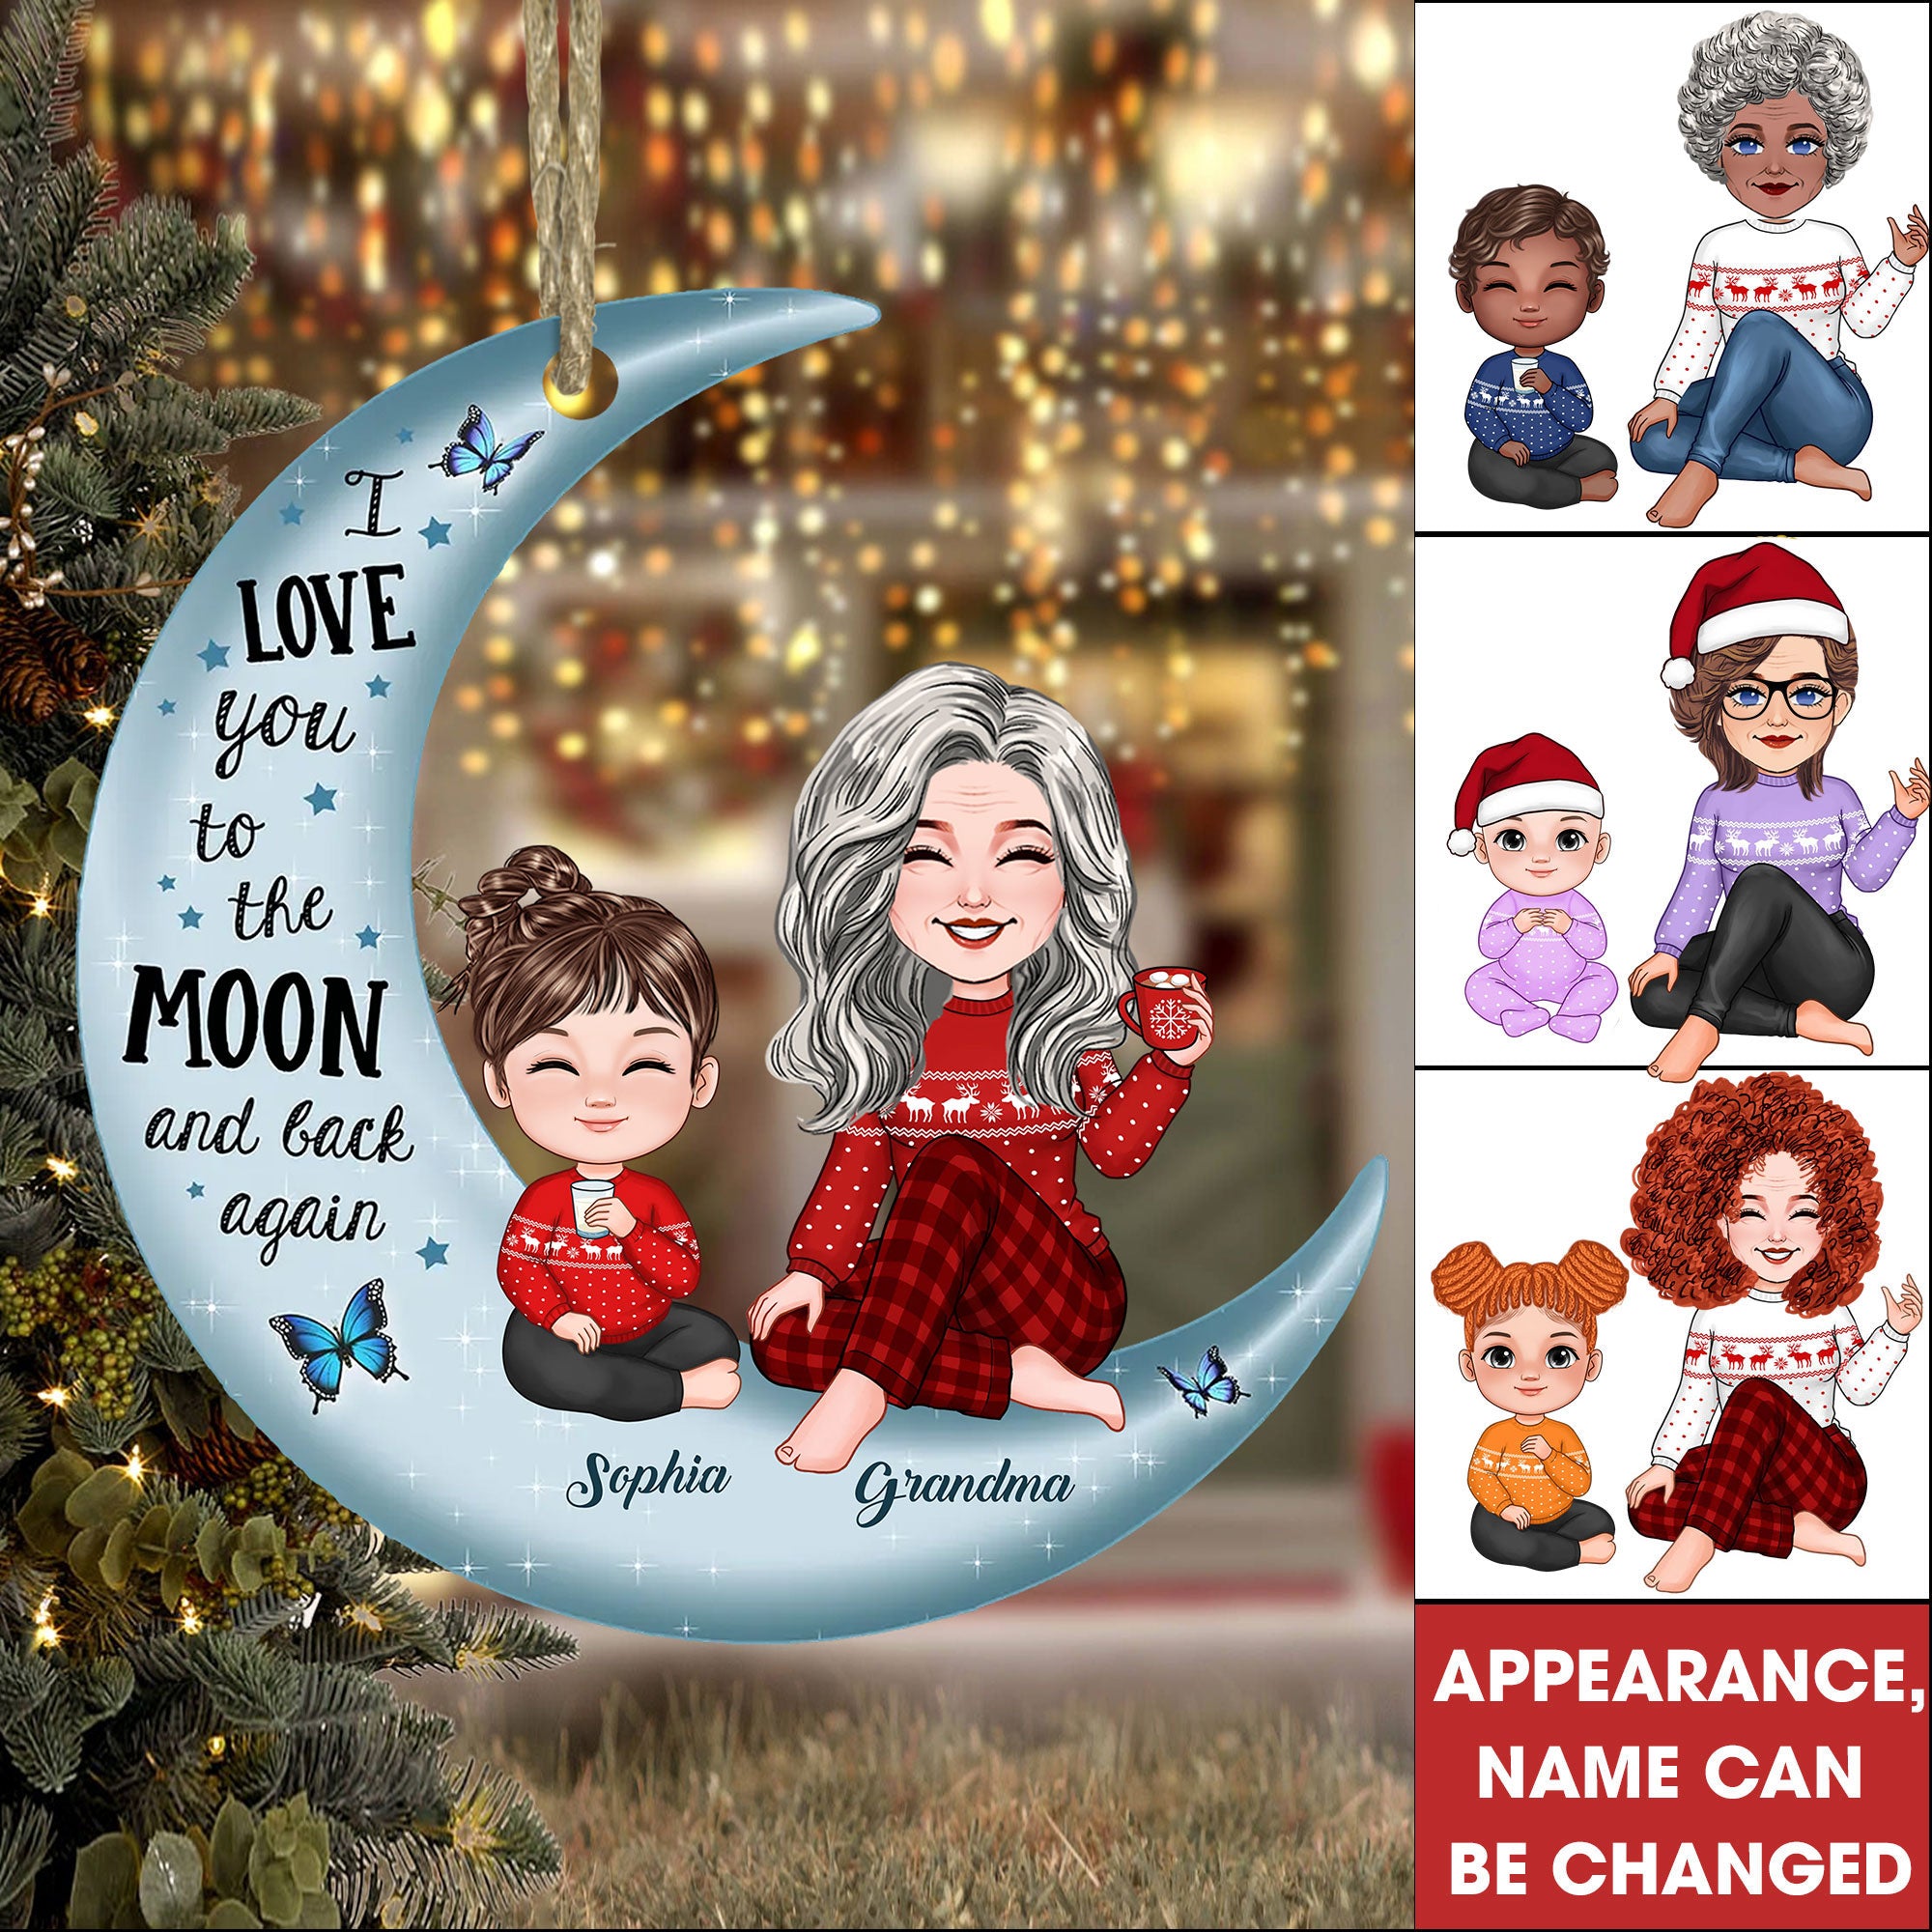 I Love You To The Moon And Back Again, Christmas Gift For Mom, Grandma, Custom Appearances And Names - Personalized Acrylic Ornament - Gift For Christmas, Family Gift